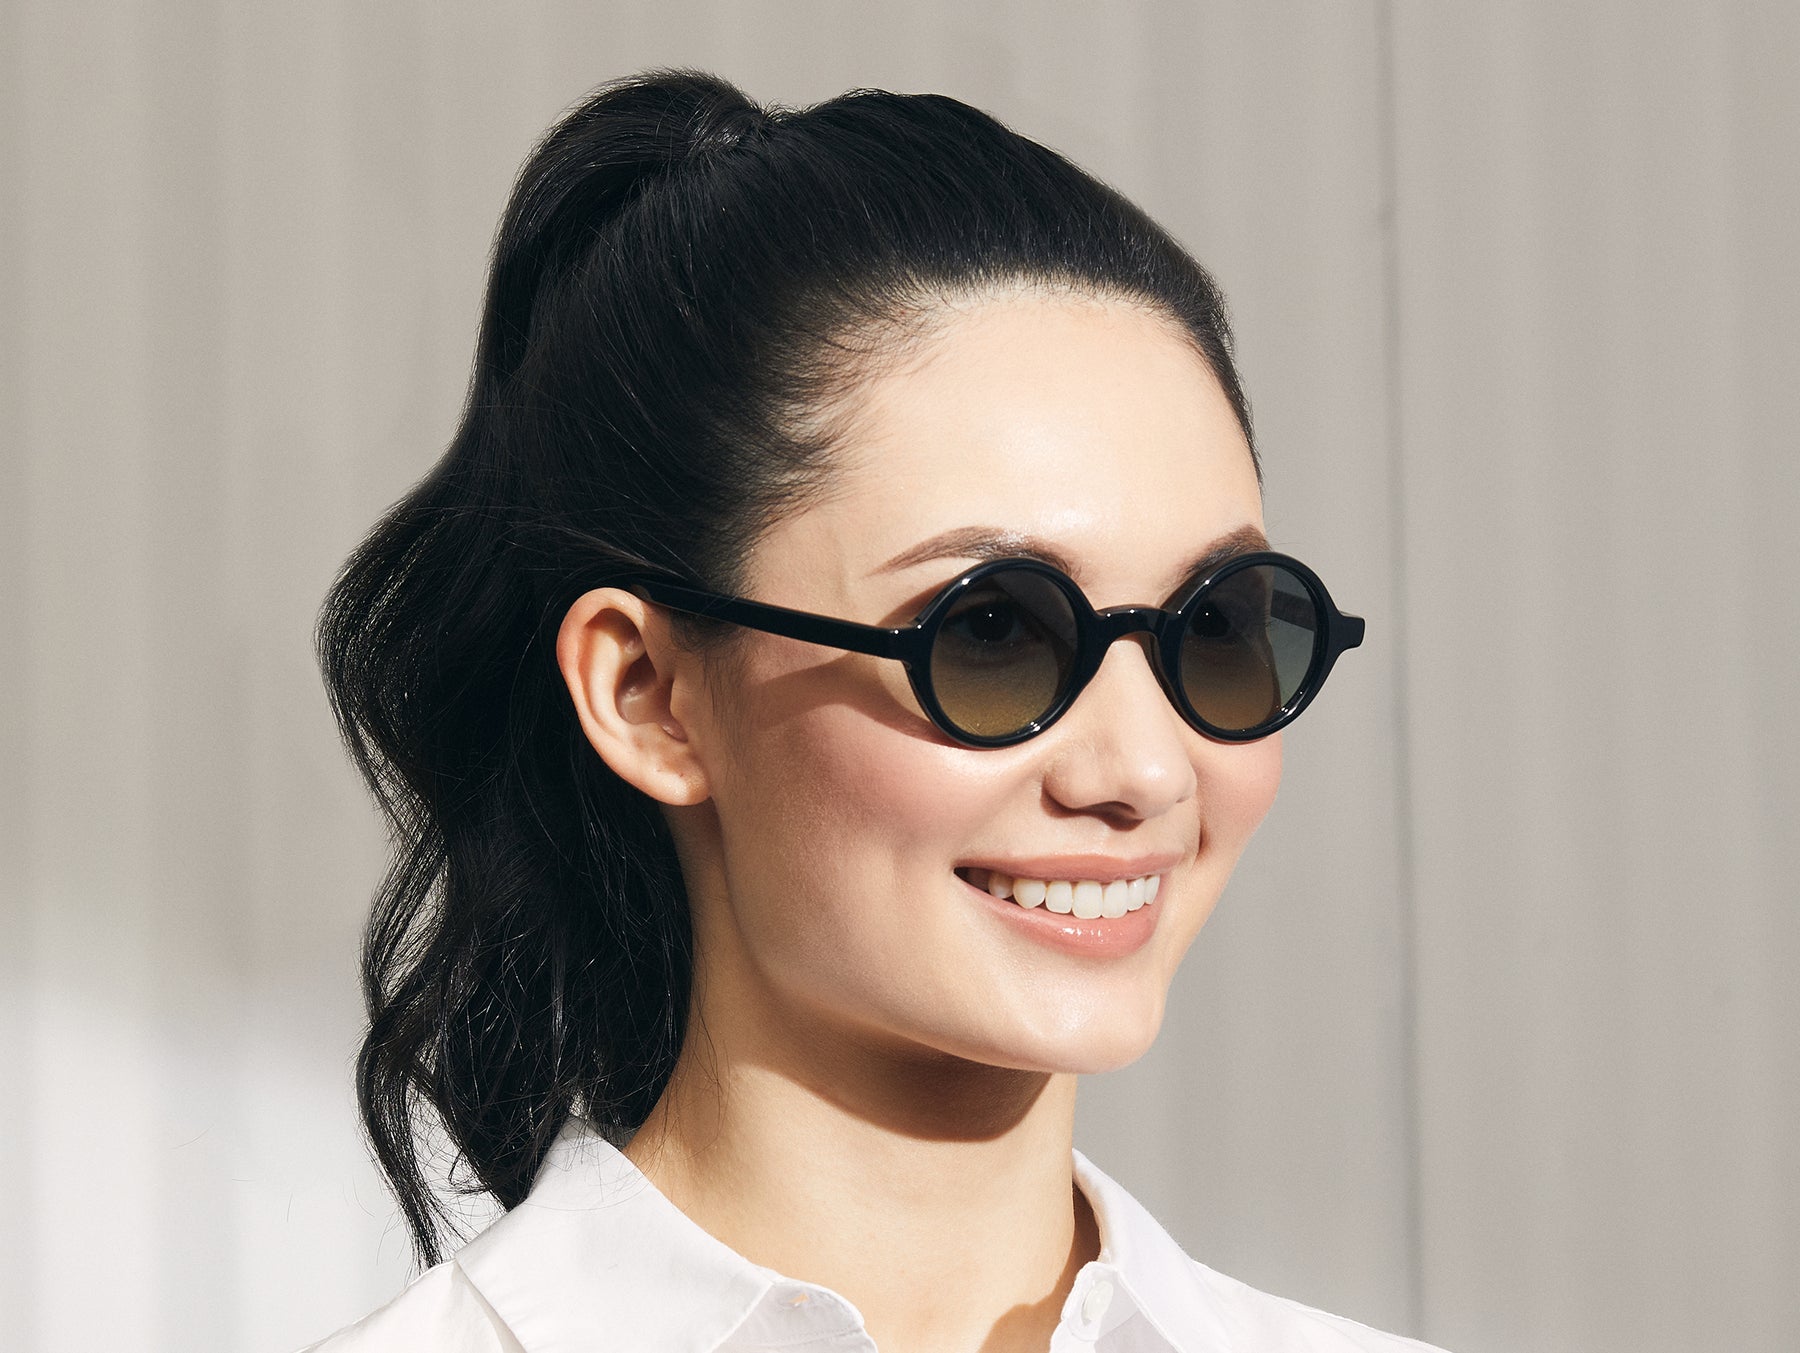 Model is wearing The ZOLMAN in Black in size 42 with Forest Wood Tinted Lenses